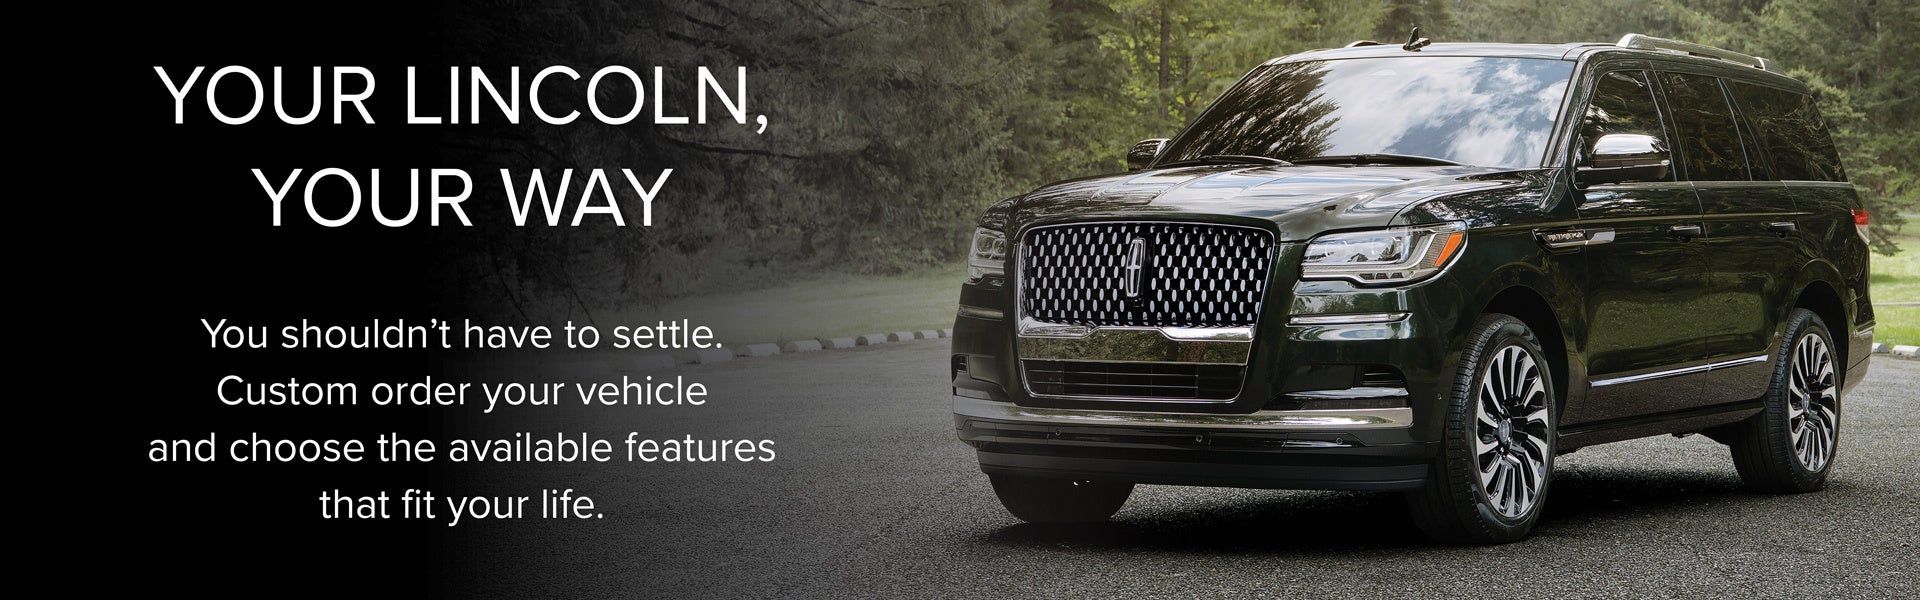 Click here to order your custom new Lincoln!